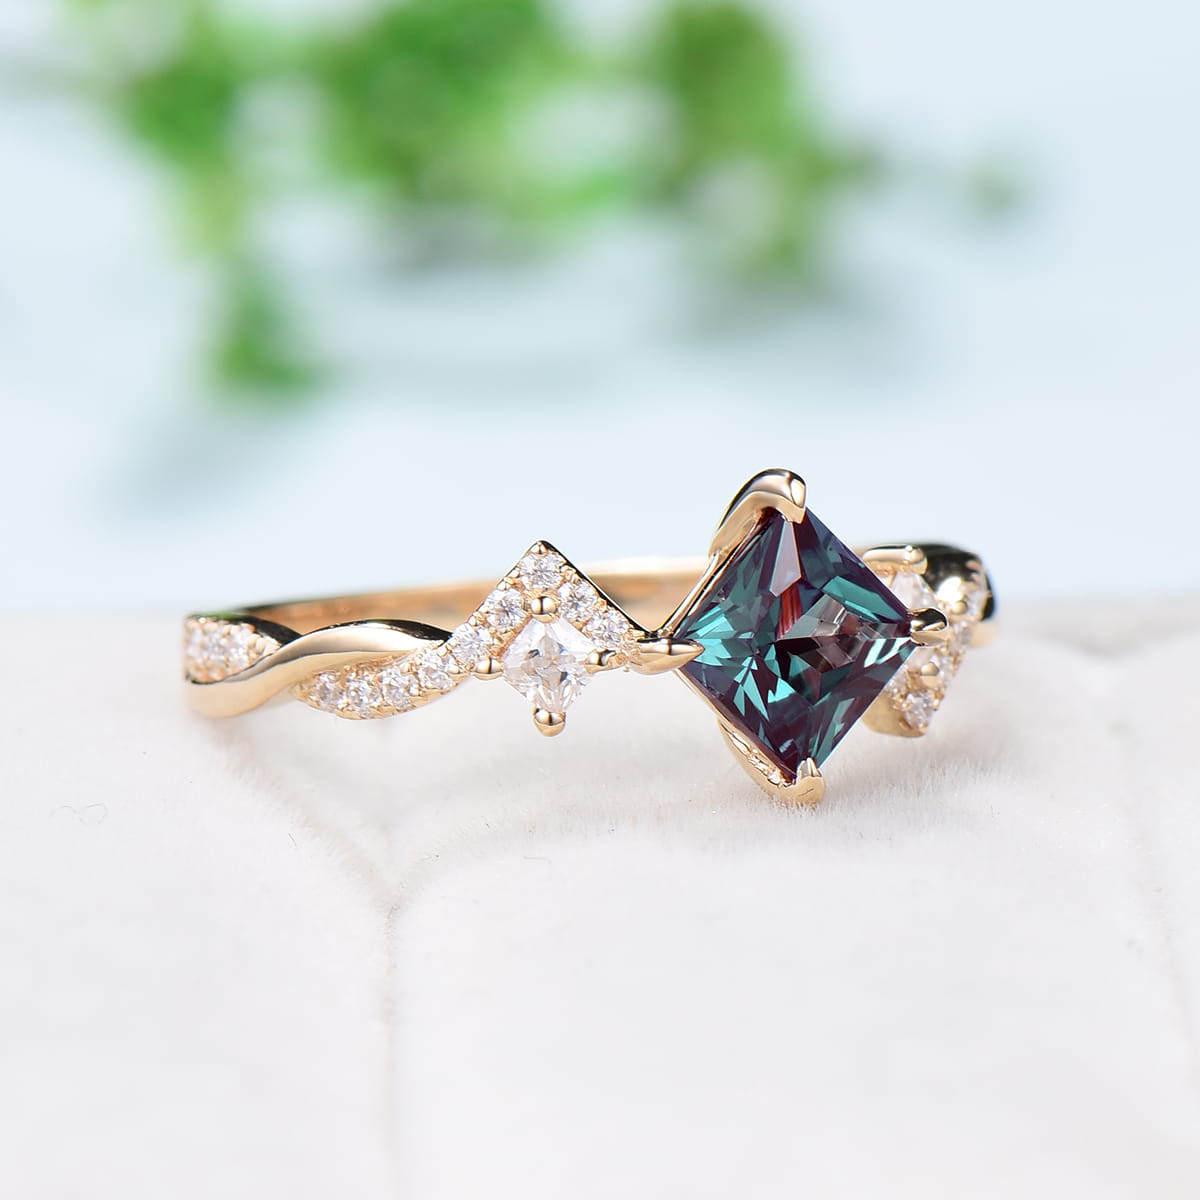 Unique 5mm princess cut alexandrite ring twisted-Dainty alexandrite moissanite engagement ring-White Gold infinity anniversary ring - PENFINE